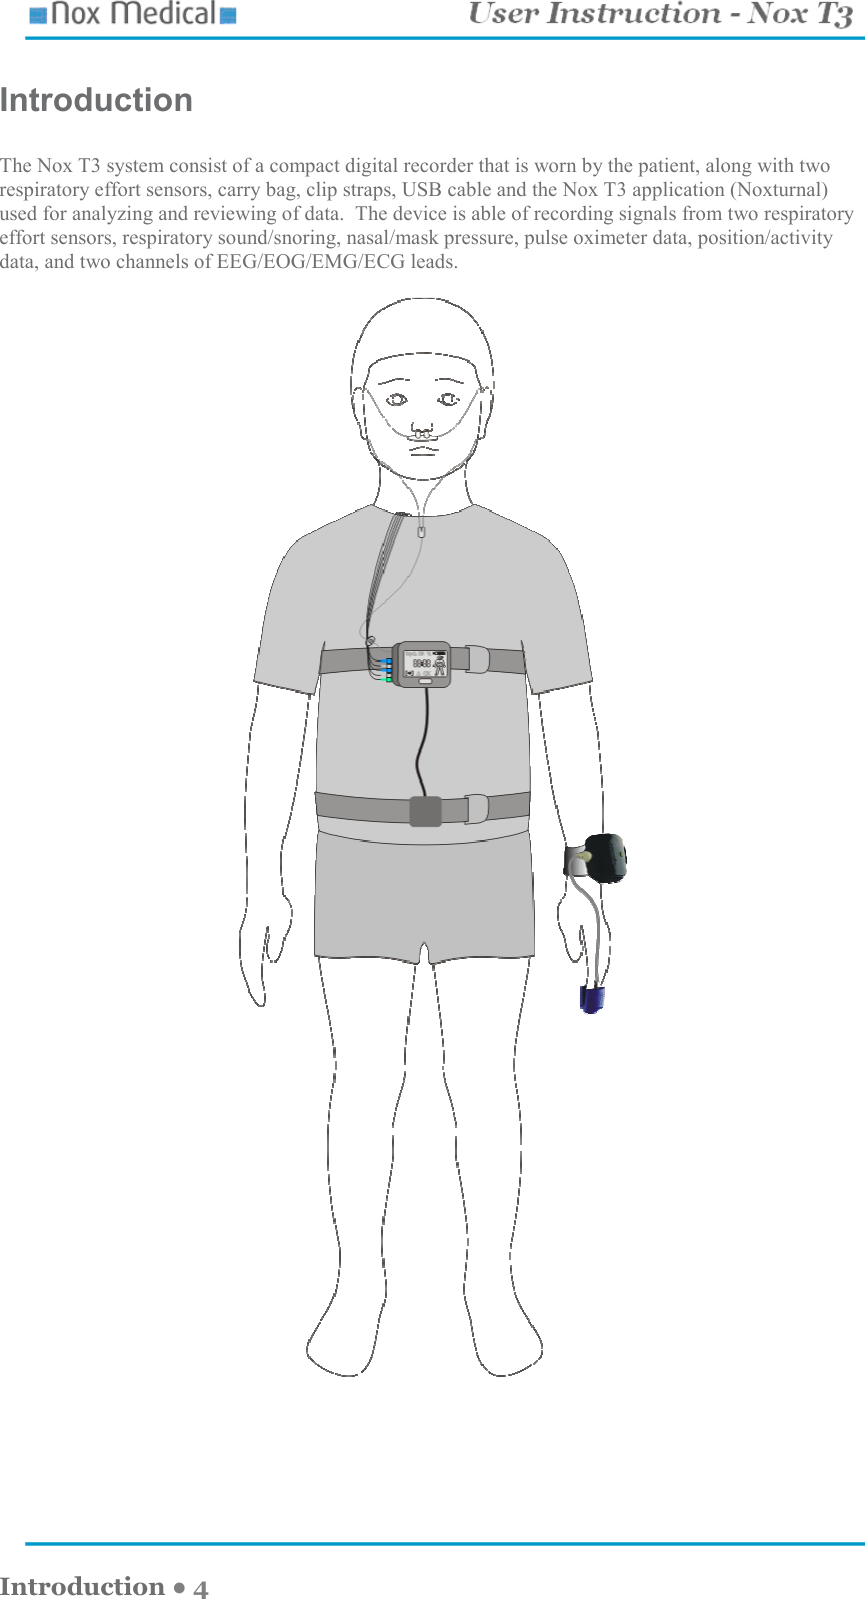    Introduction ● 4 Introduction  The Nox T3 system consist of a compact digital recorder that is worn by the patient, along with two respiratory effort sensors, carry bag, clip straps, USB cable and the Nox T3 application (Noxturnal) used for analyzing and reviewing of data.  The device is able of recording signals from two respiratory effort sensors, respiratory sound/snoring, nasal/mask pressure, pulse oximeter data, position/activity data, and two channels of EEG/EOG/EMG/ECG leads.     